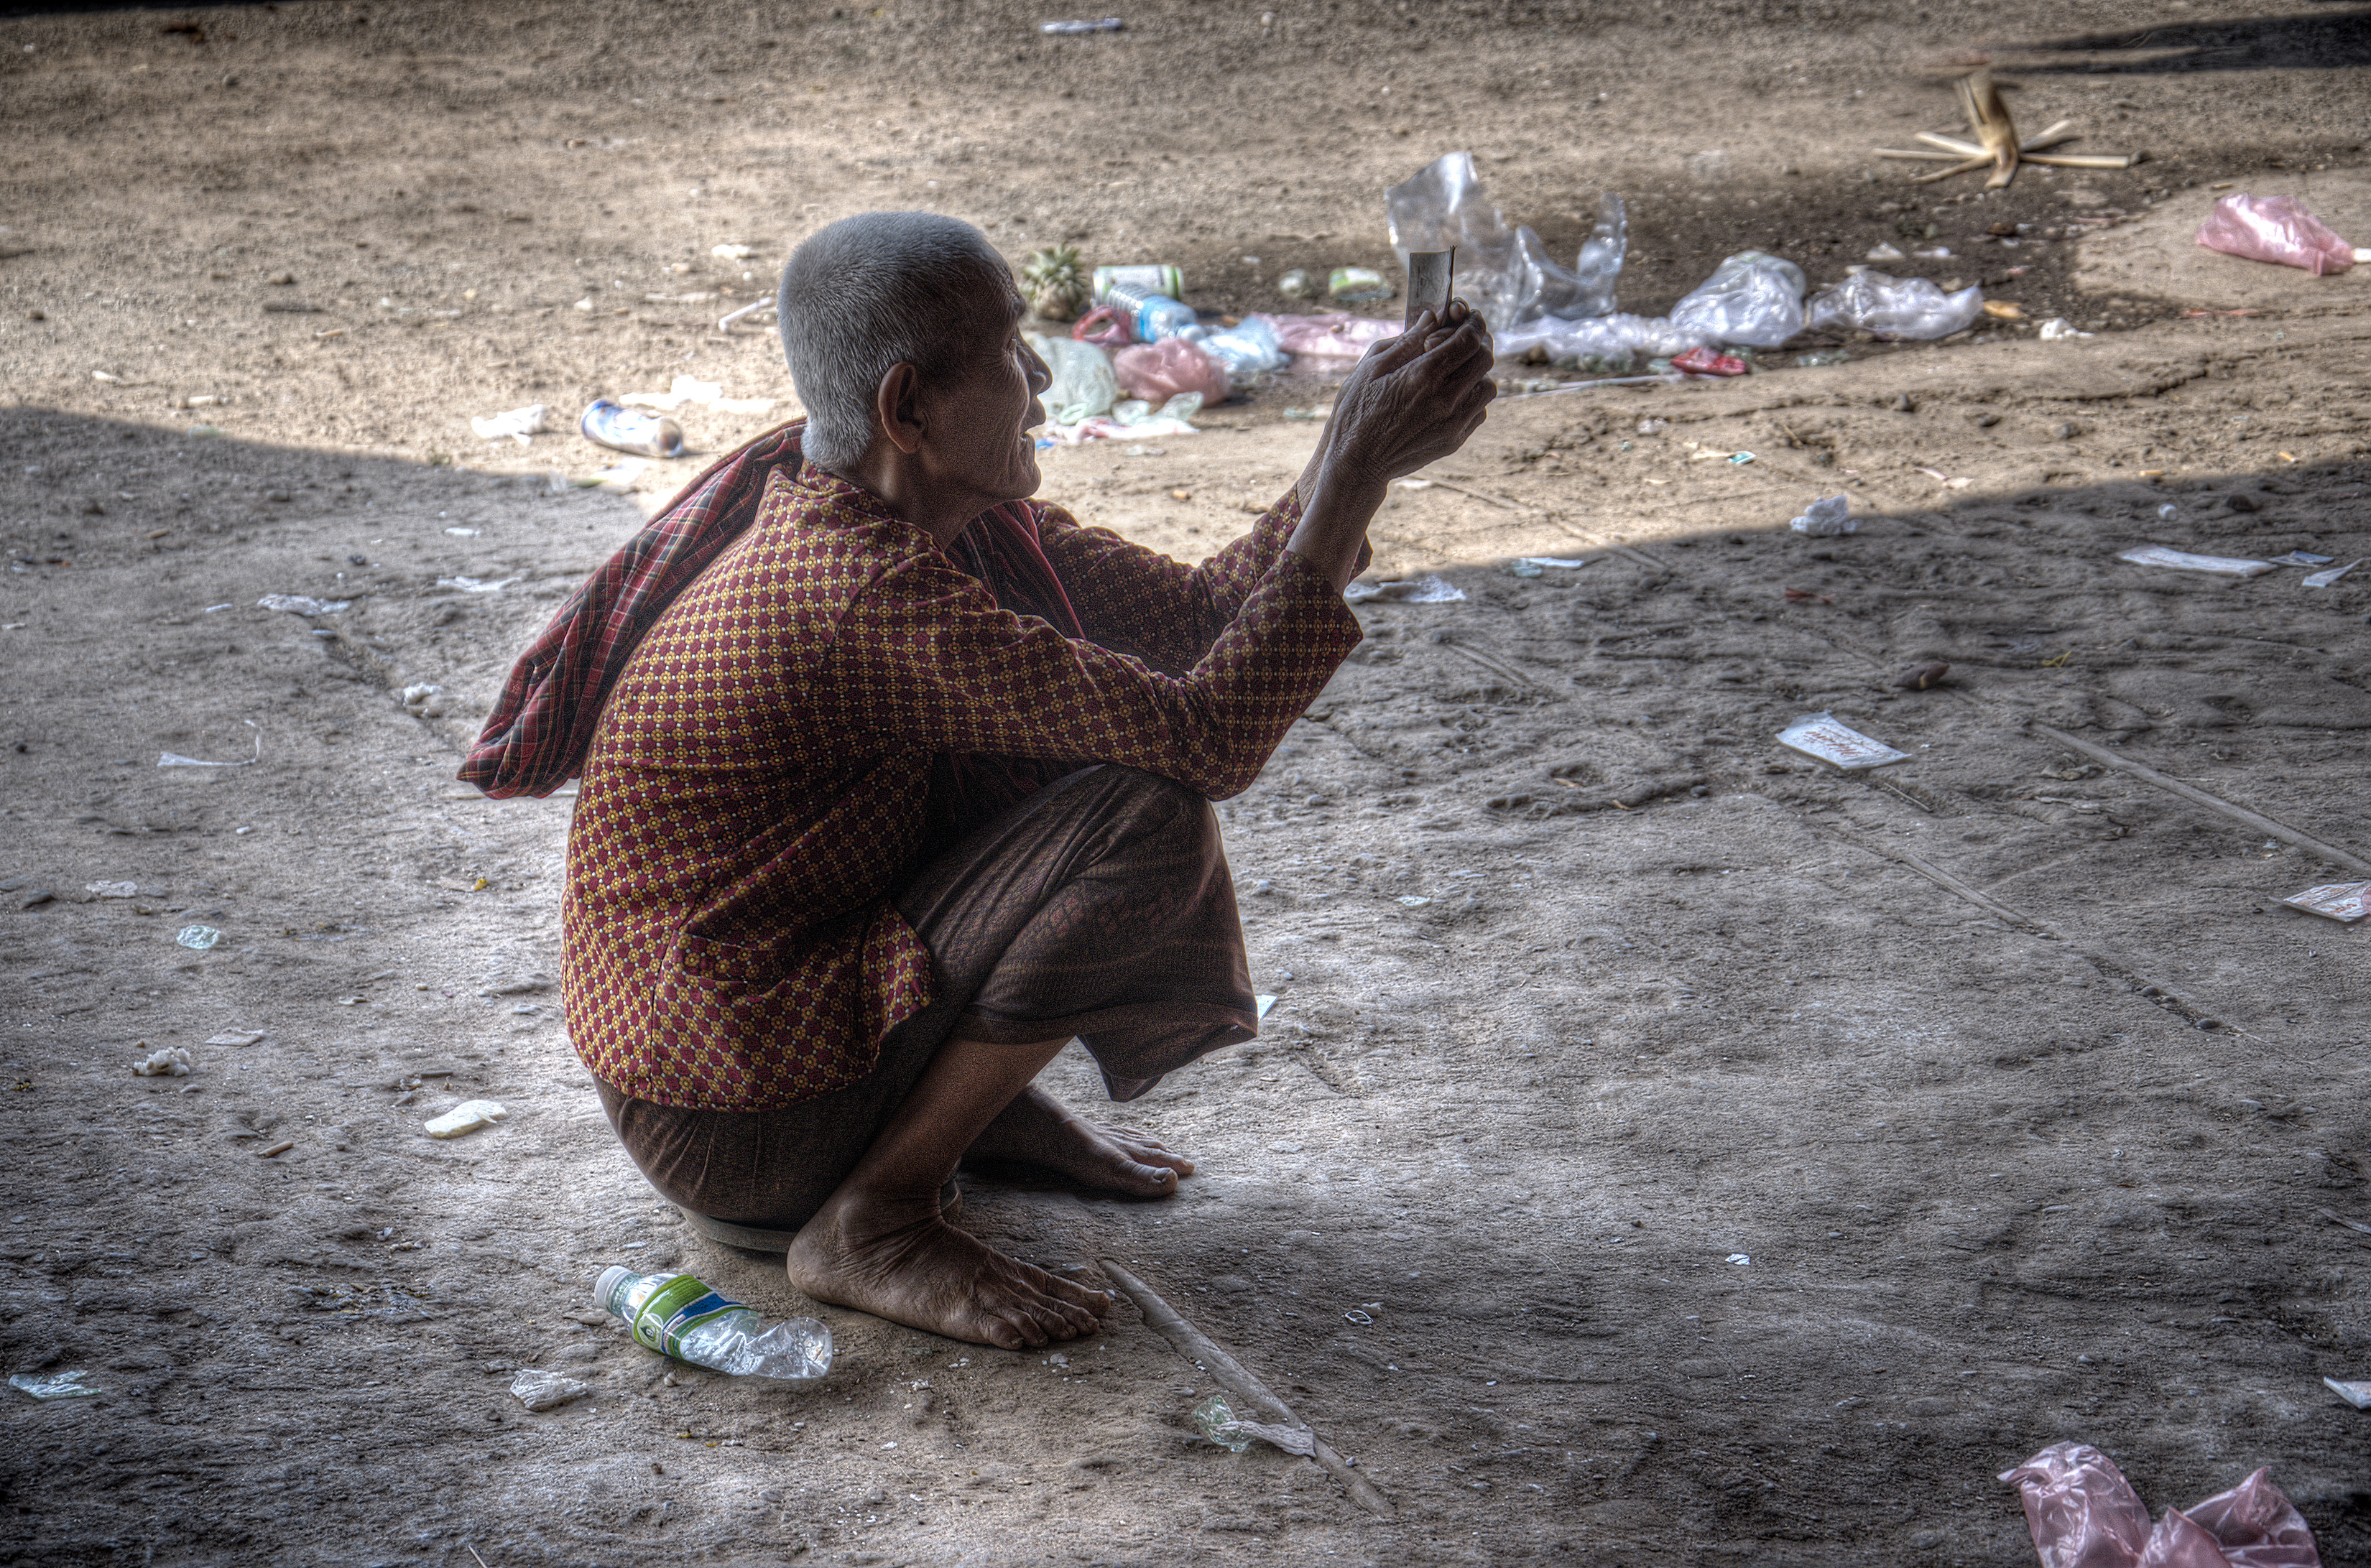 An old widow begging for food and money in Kampong Cham Province, Cambodia